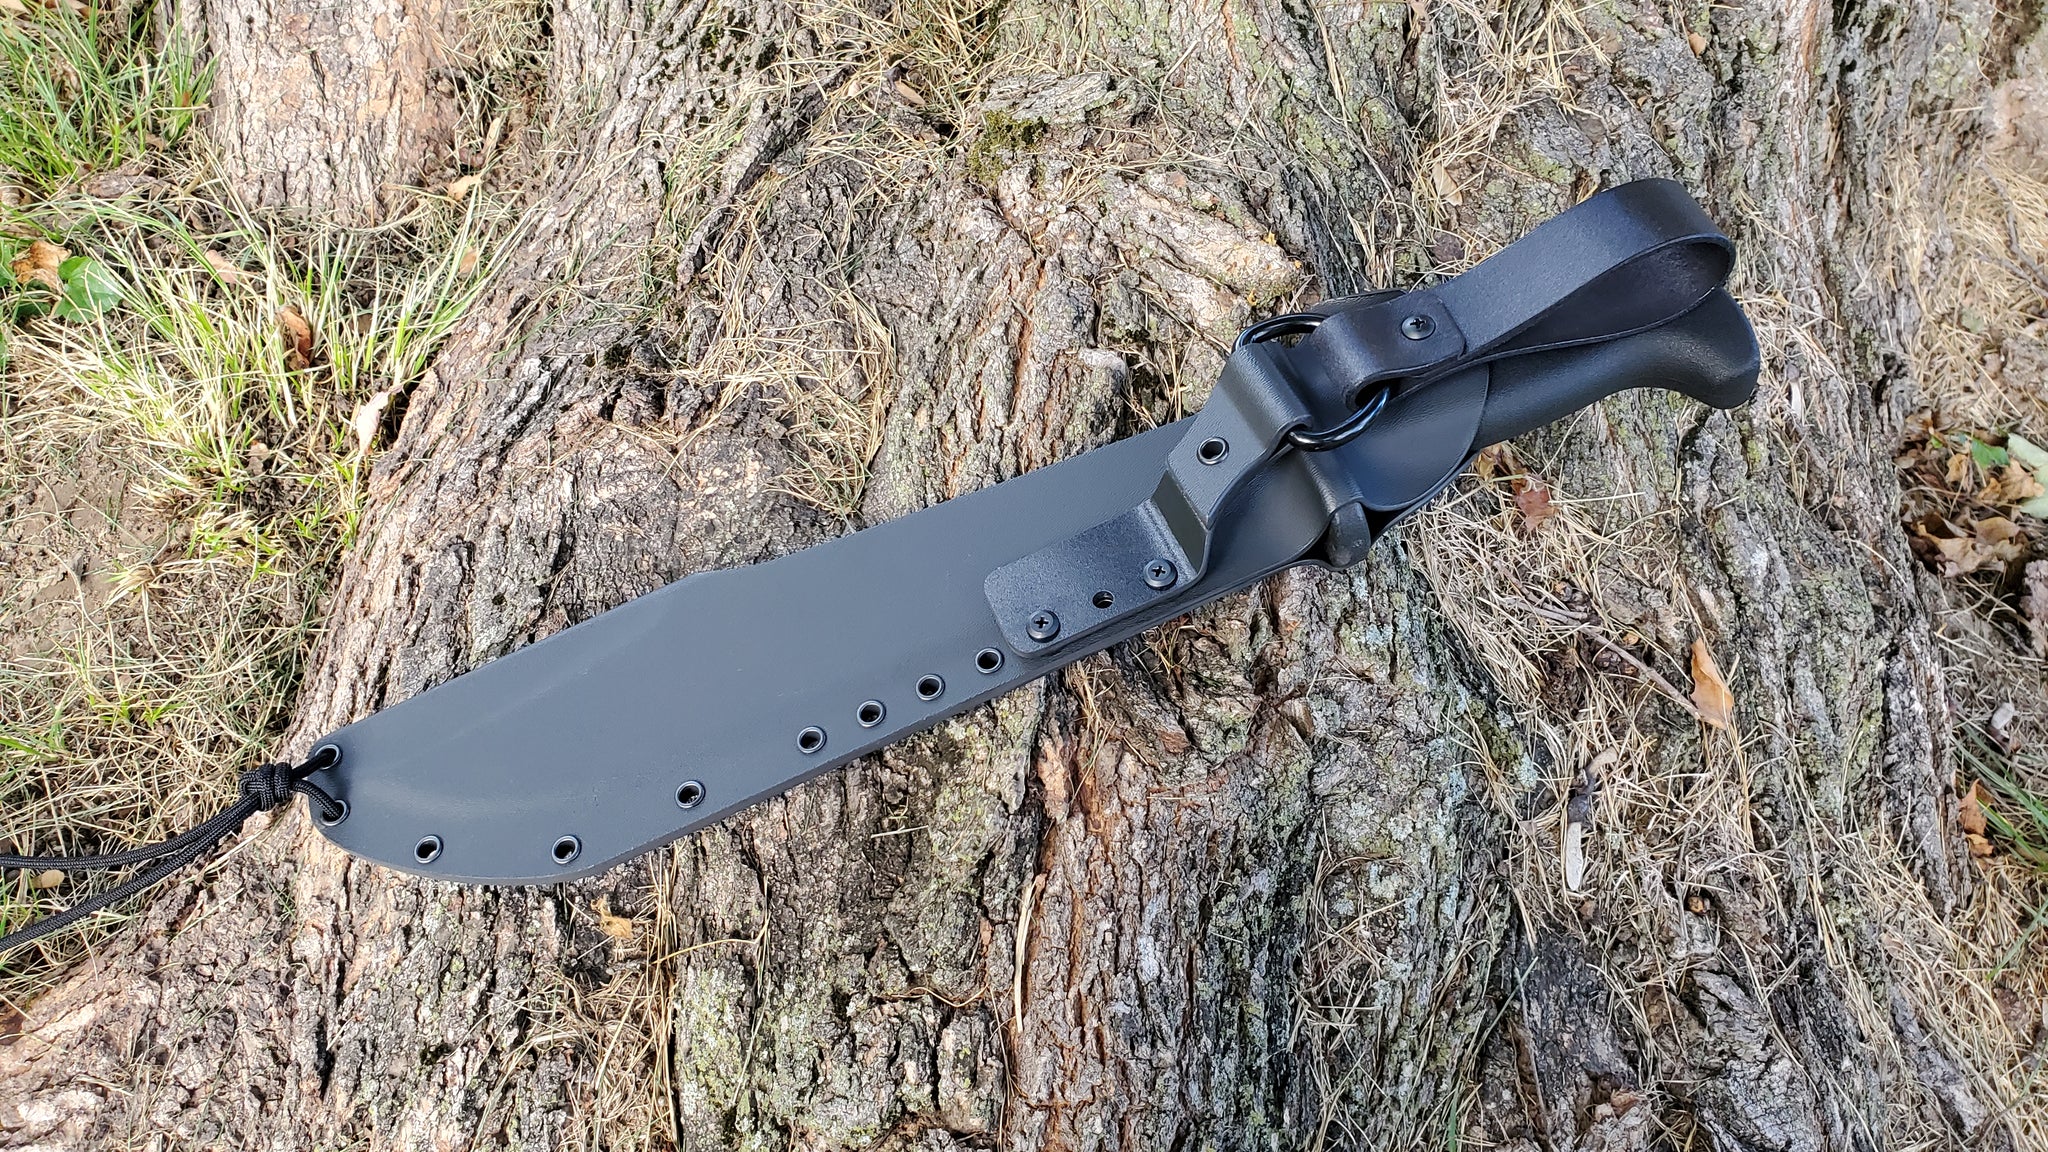 COLD STEEL "BLACK BEAR BOWIE" Kydex Taco Sheath with Dangler